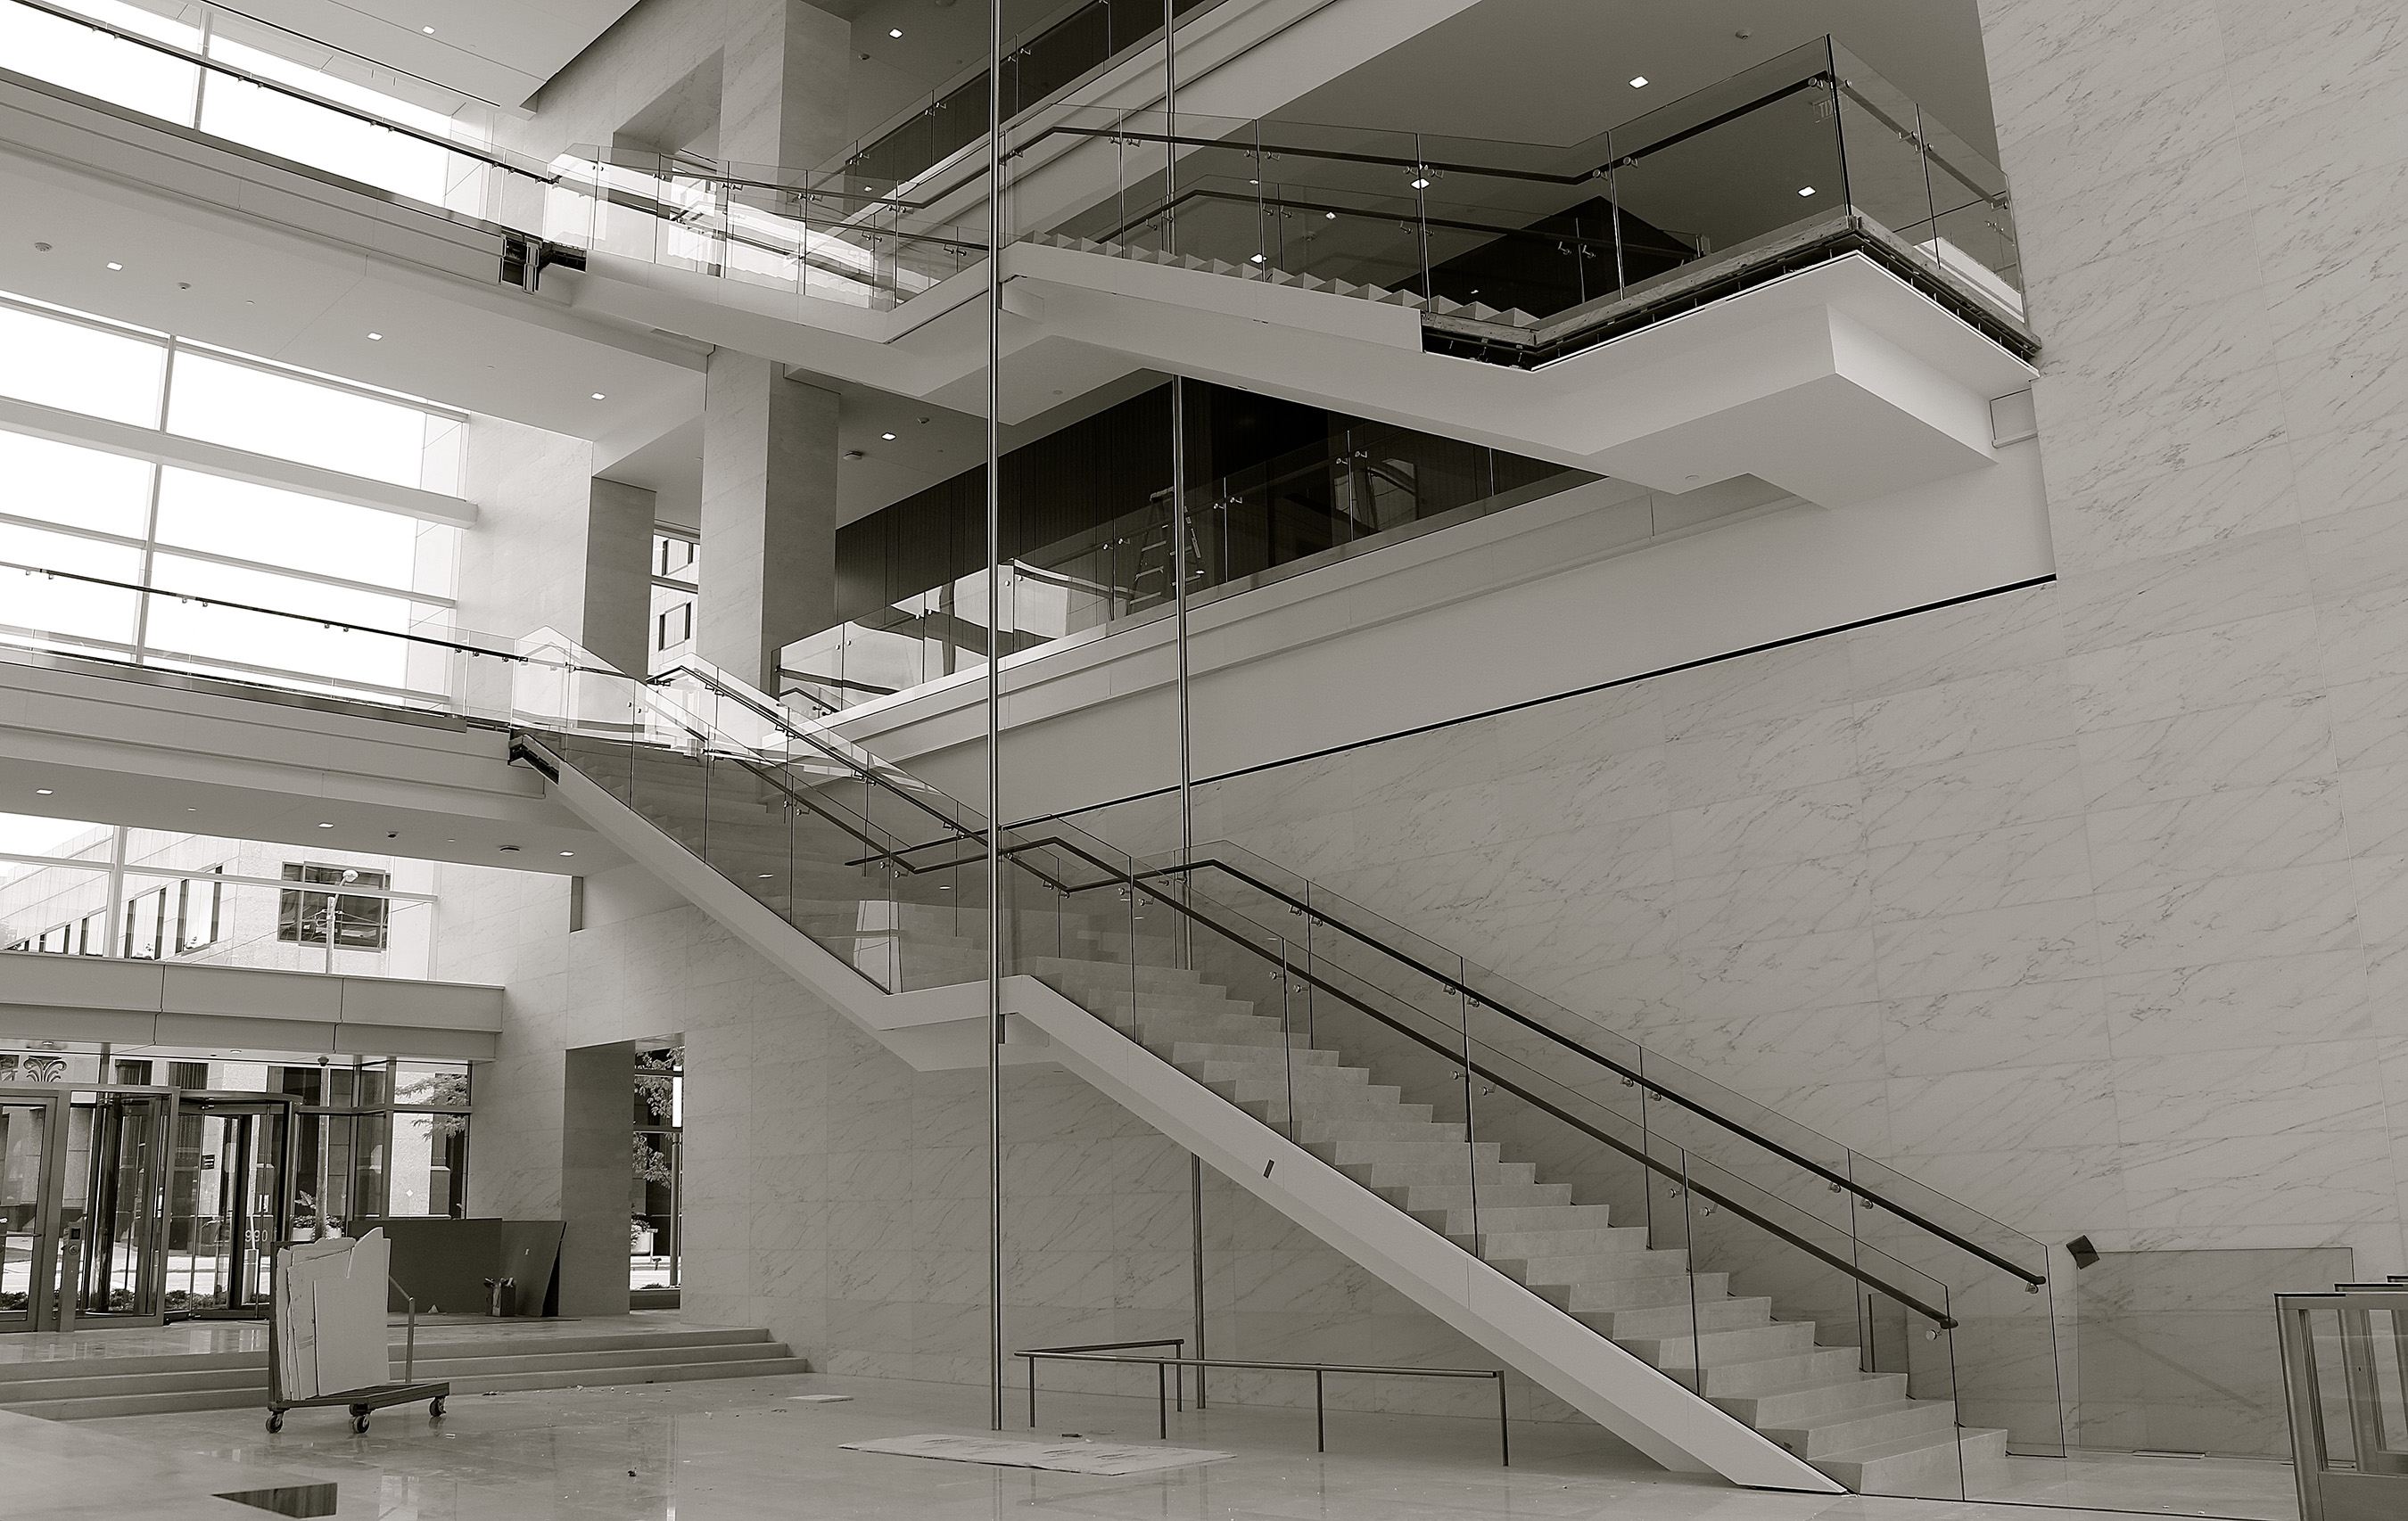 The open stairway in the Mason Street Lobby encourages people to take the stairs rather than the escalator, staying true to Northwestern Mutual’s focus on health and wellness.